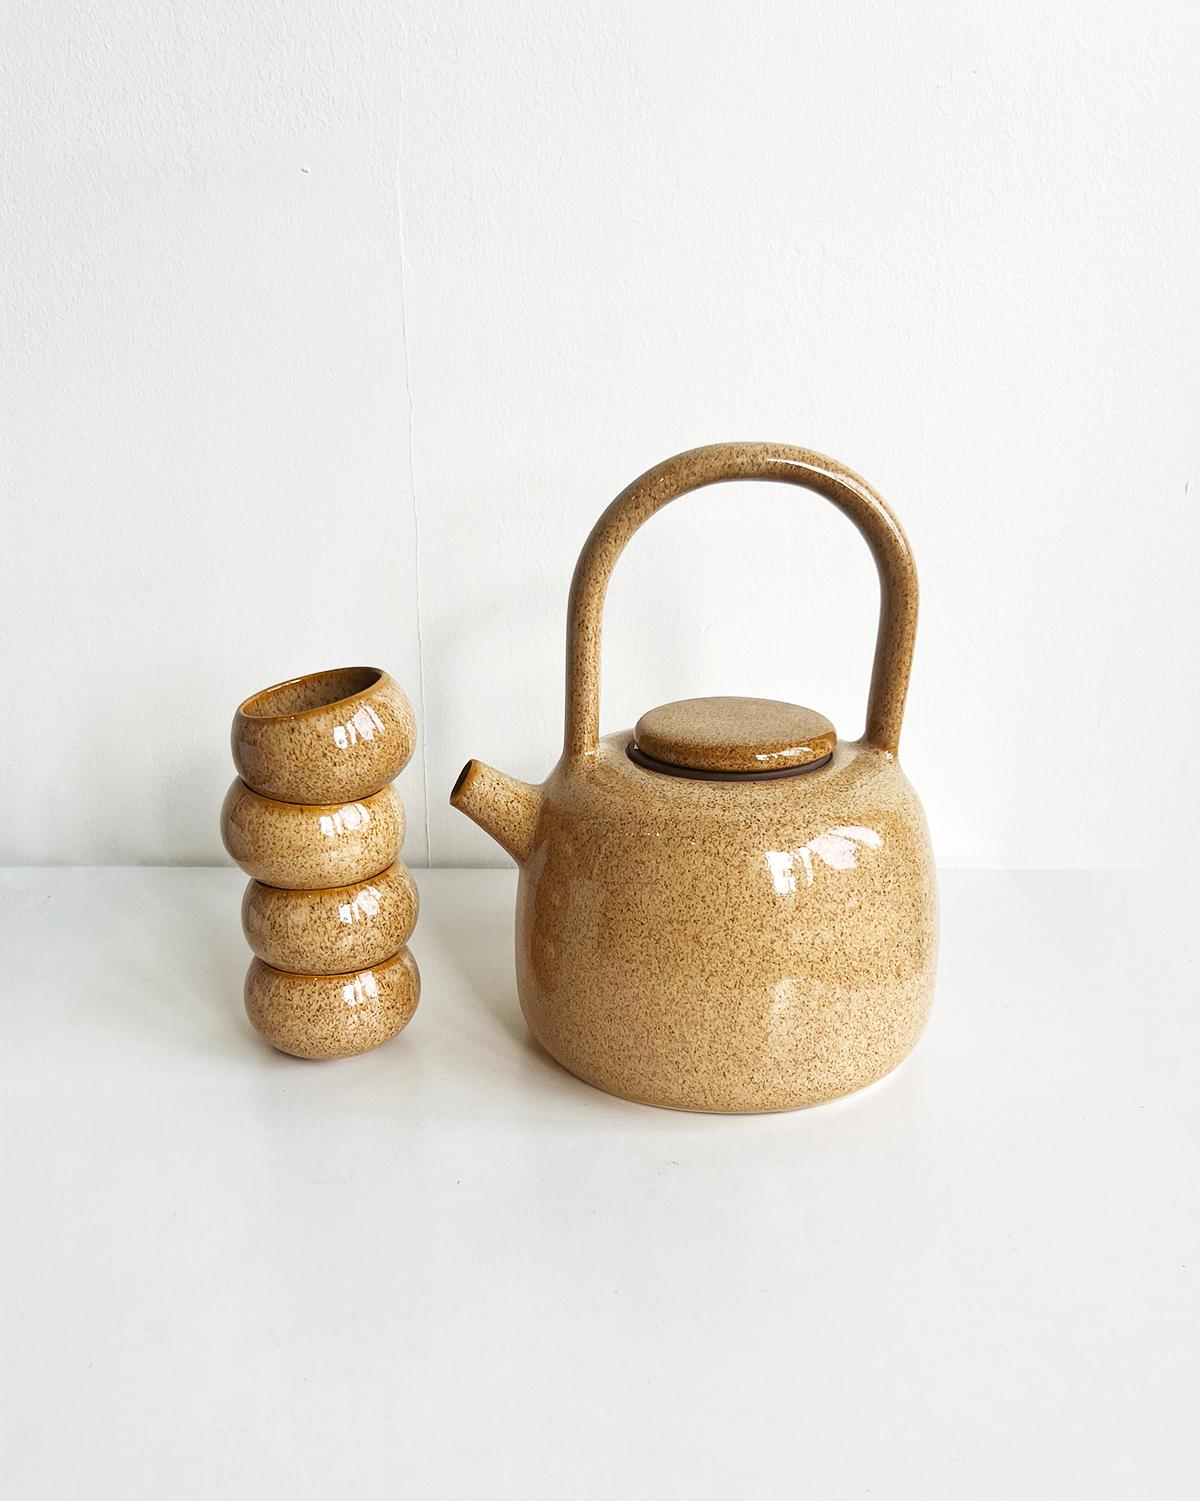 Hand-Crafted Caramel Beige Speckled Handmade Stoneware Teapot For Sale